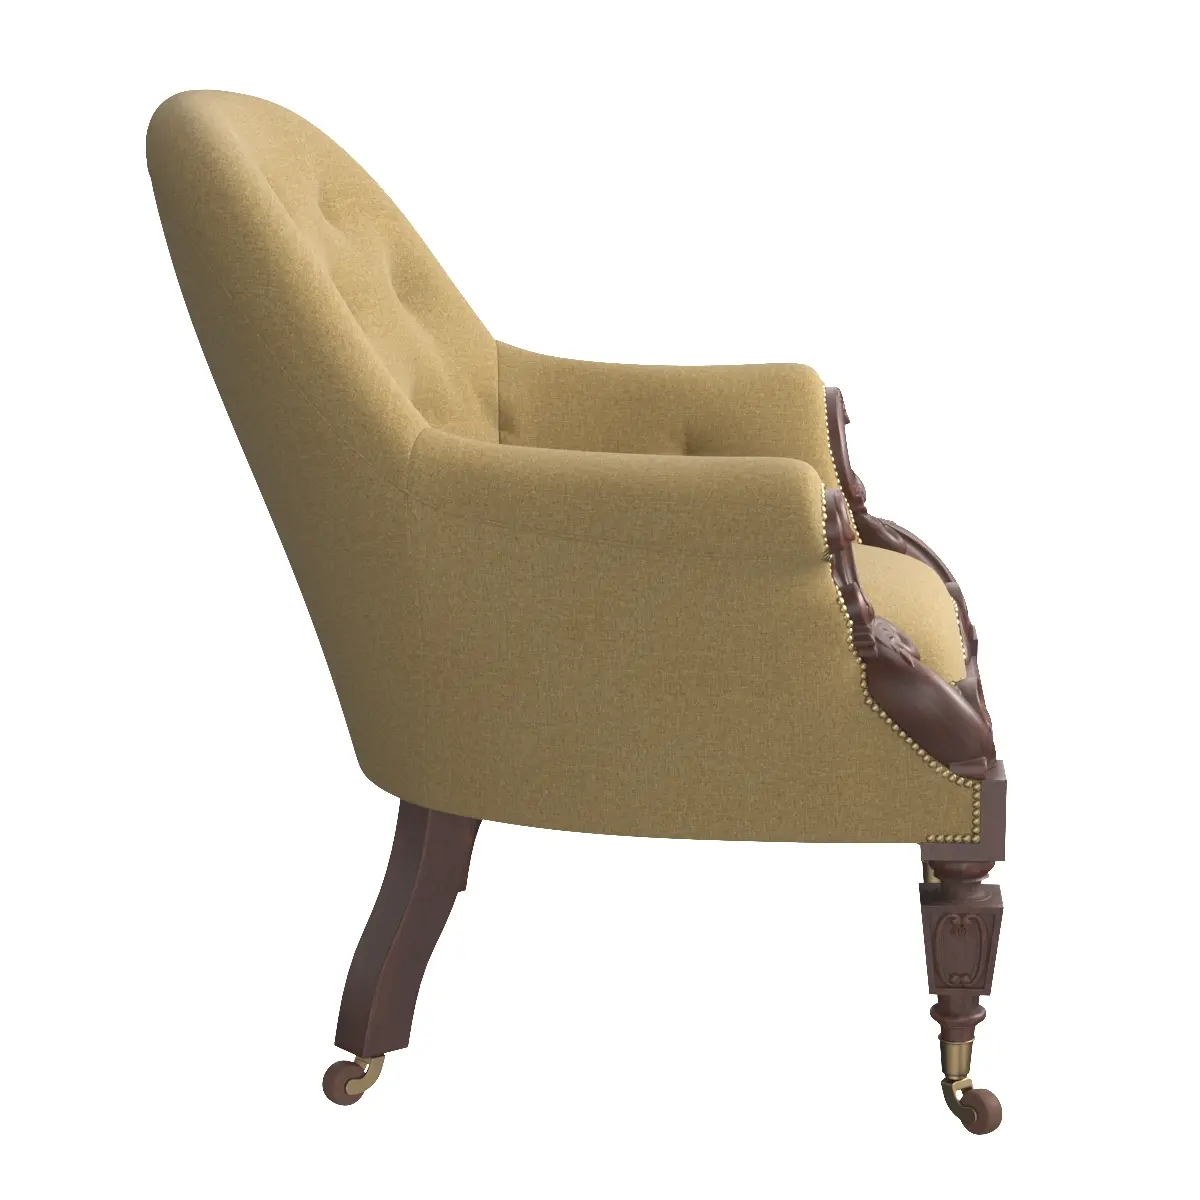 Early Victorian Rosewood Armchair 3D Model_04